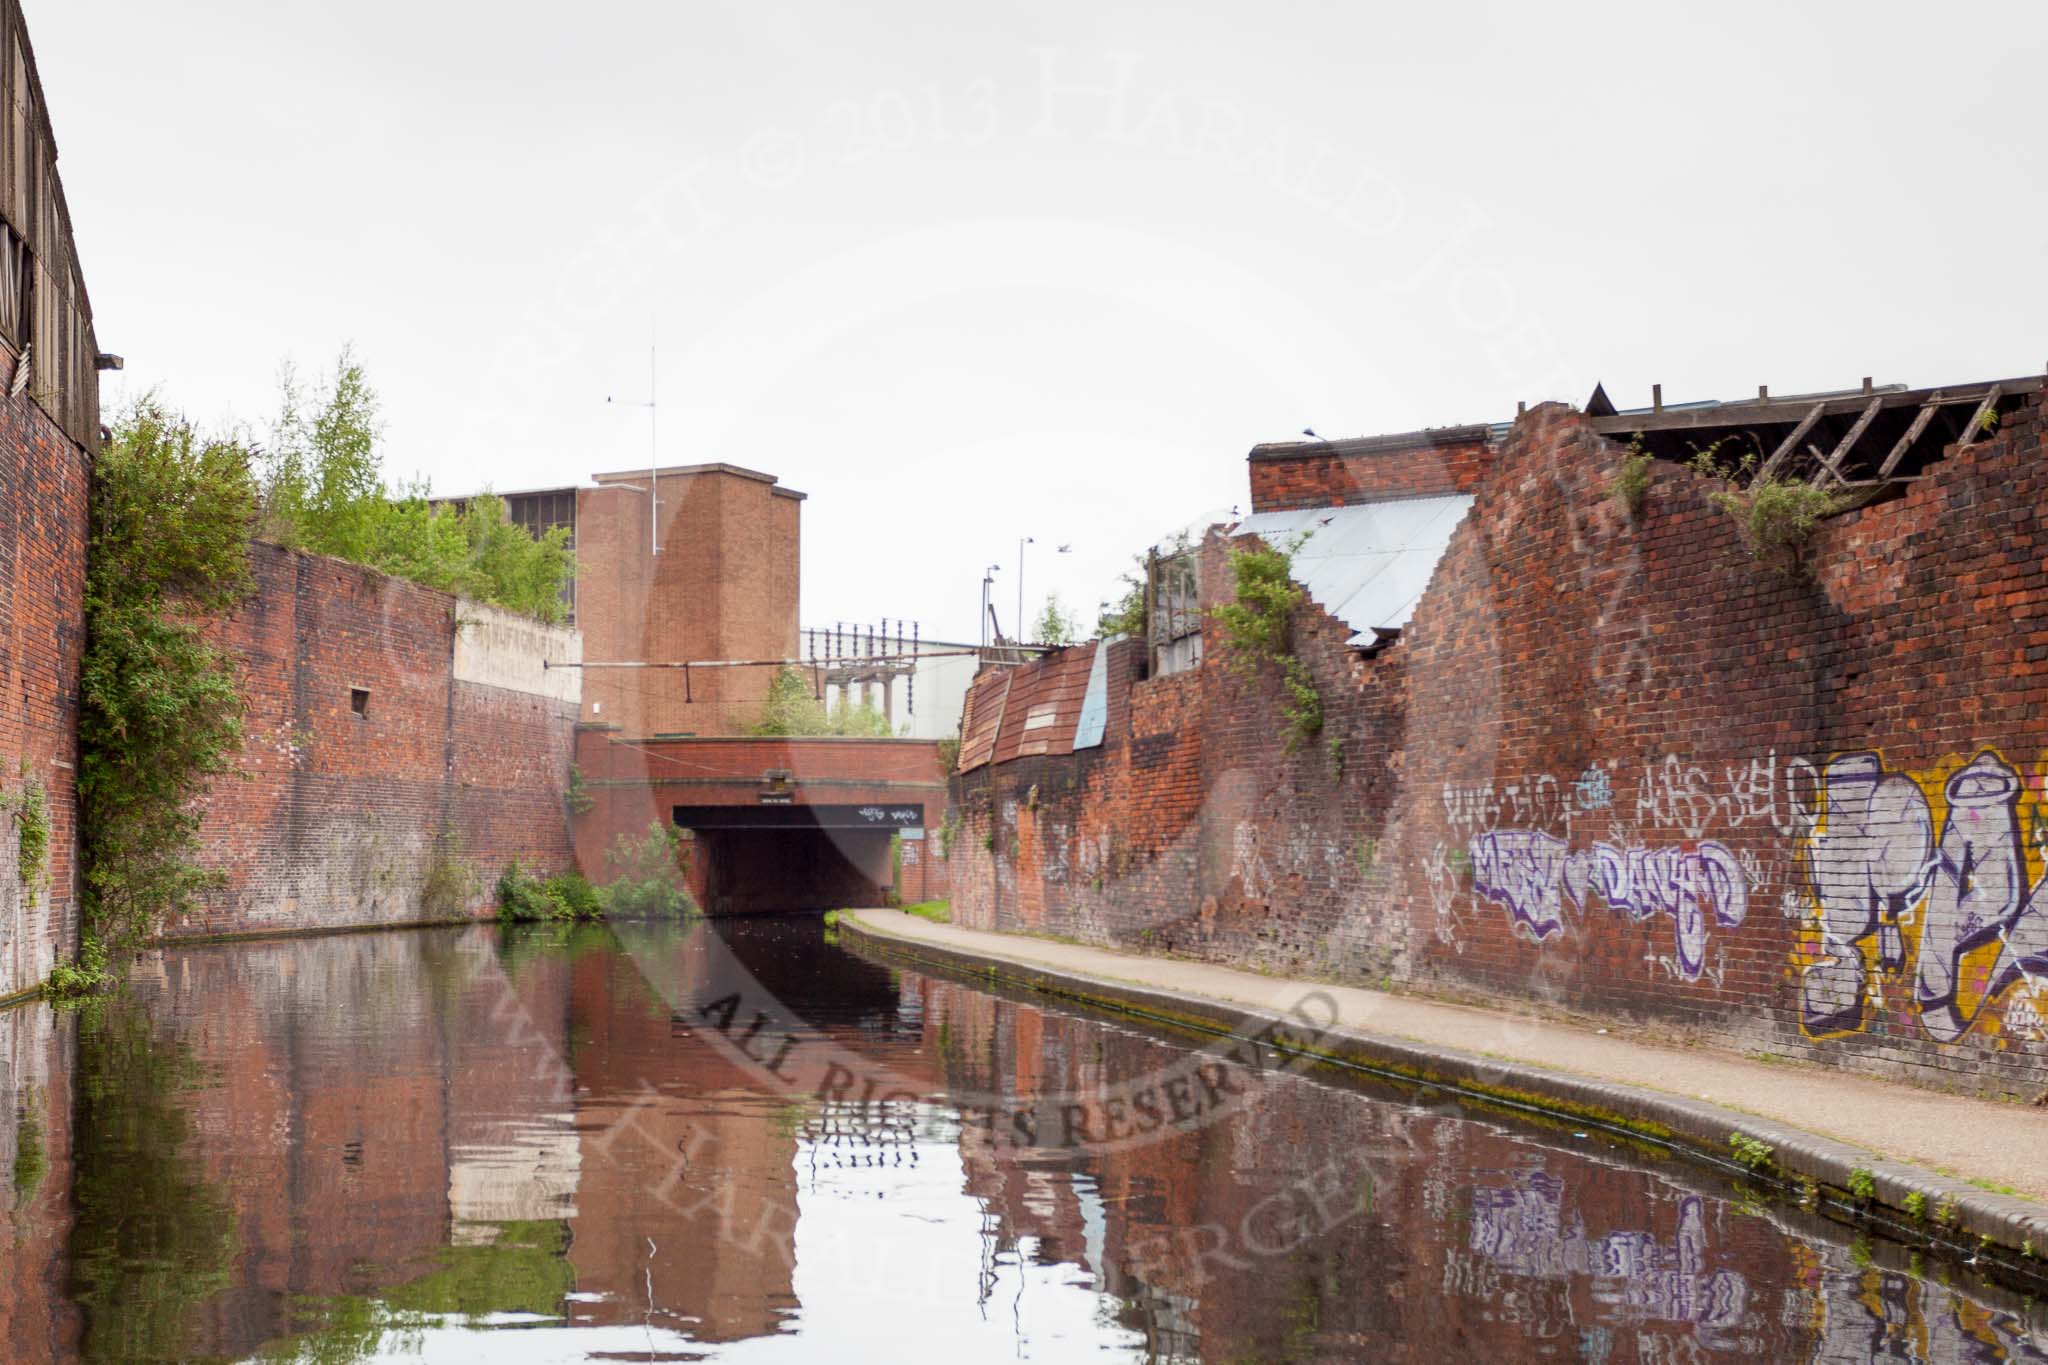 BCN 24h Marathon Challenge 2015: Old industry at the Soho Loop. In a few years or decades this will be history, and replaced by housing developments or a business park, probably with less character than the old industry.
Birmingham Canal Navigations,



on 23 May 2015 at 09:00, image #28